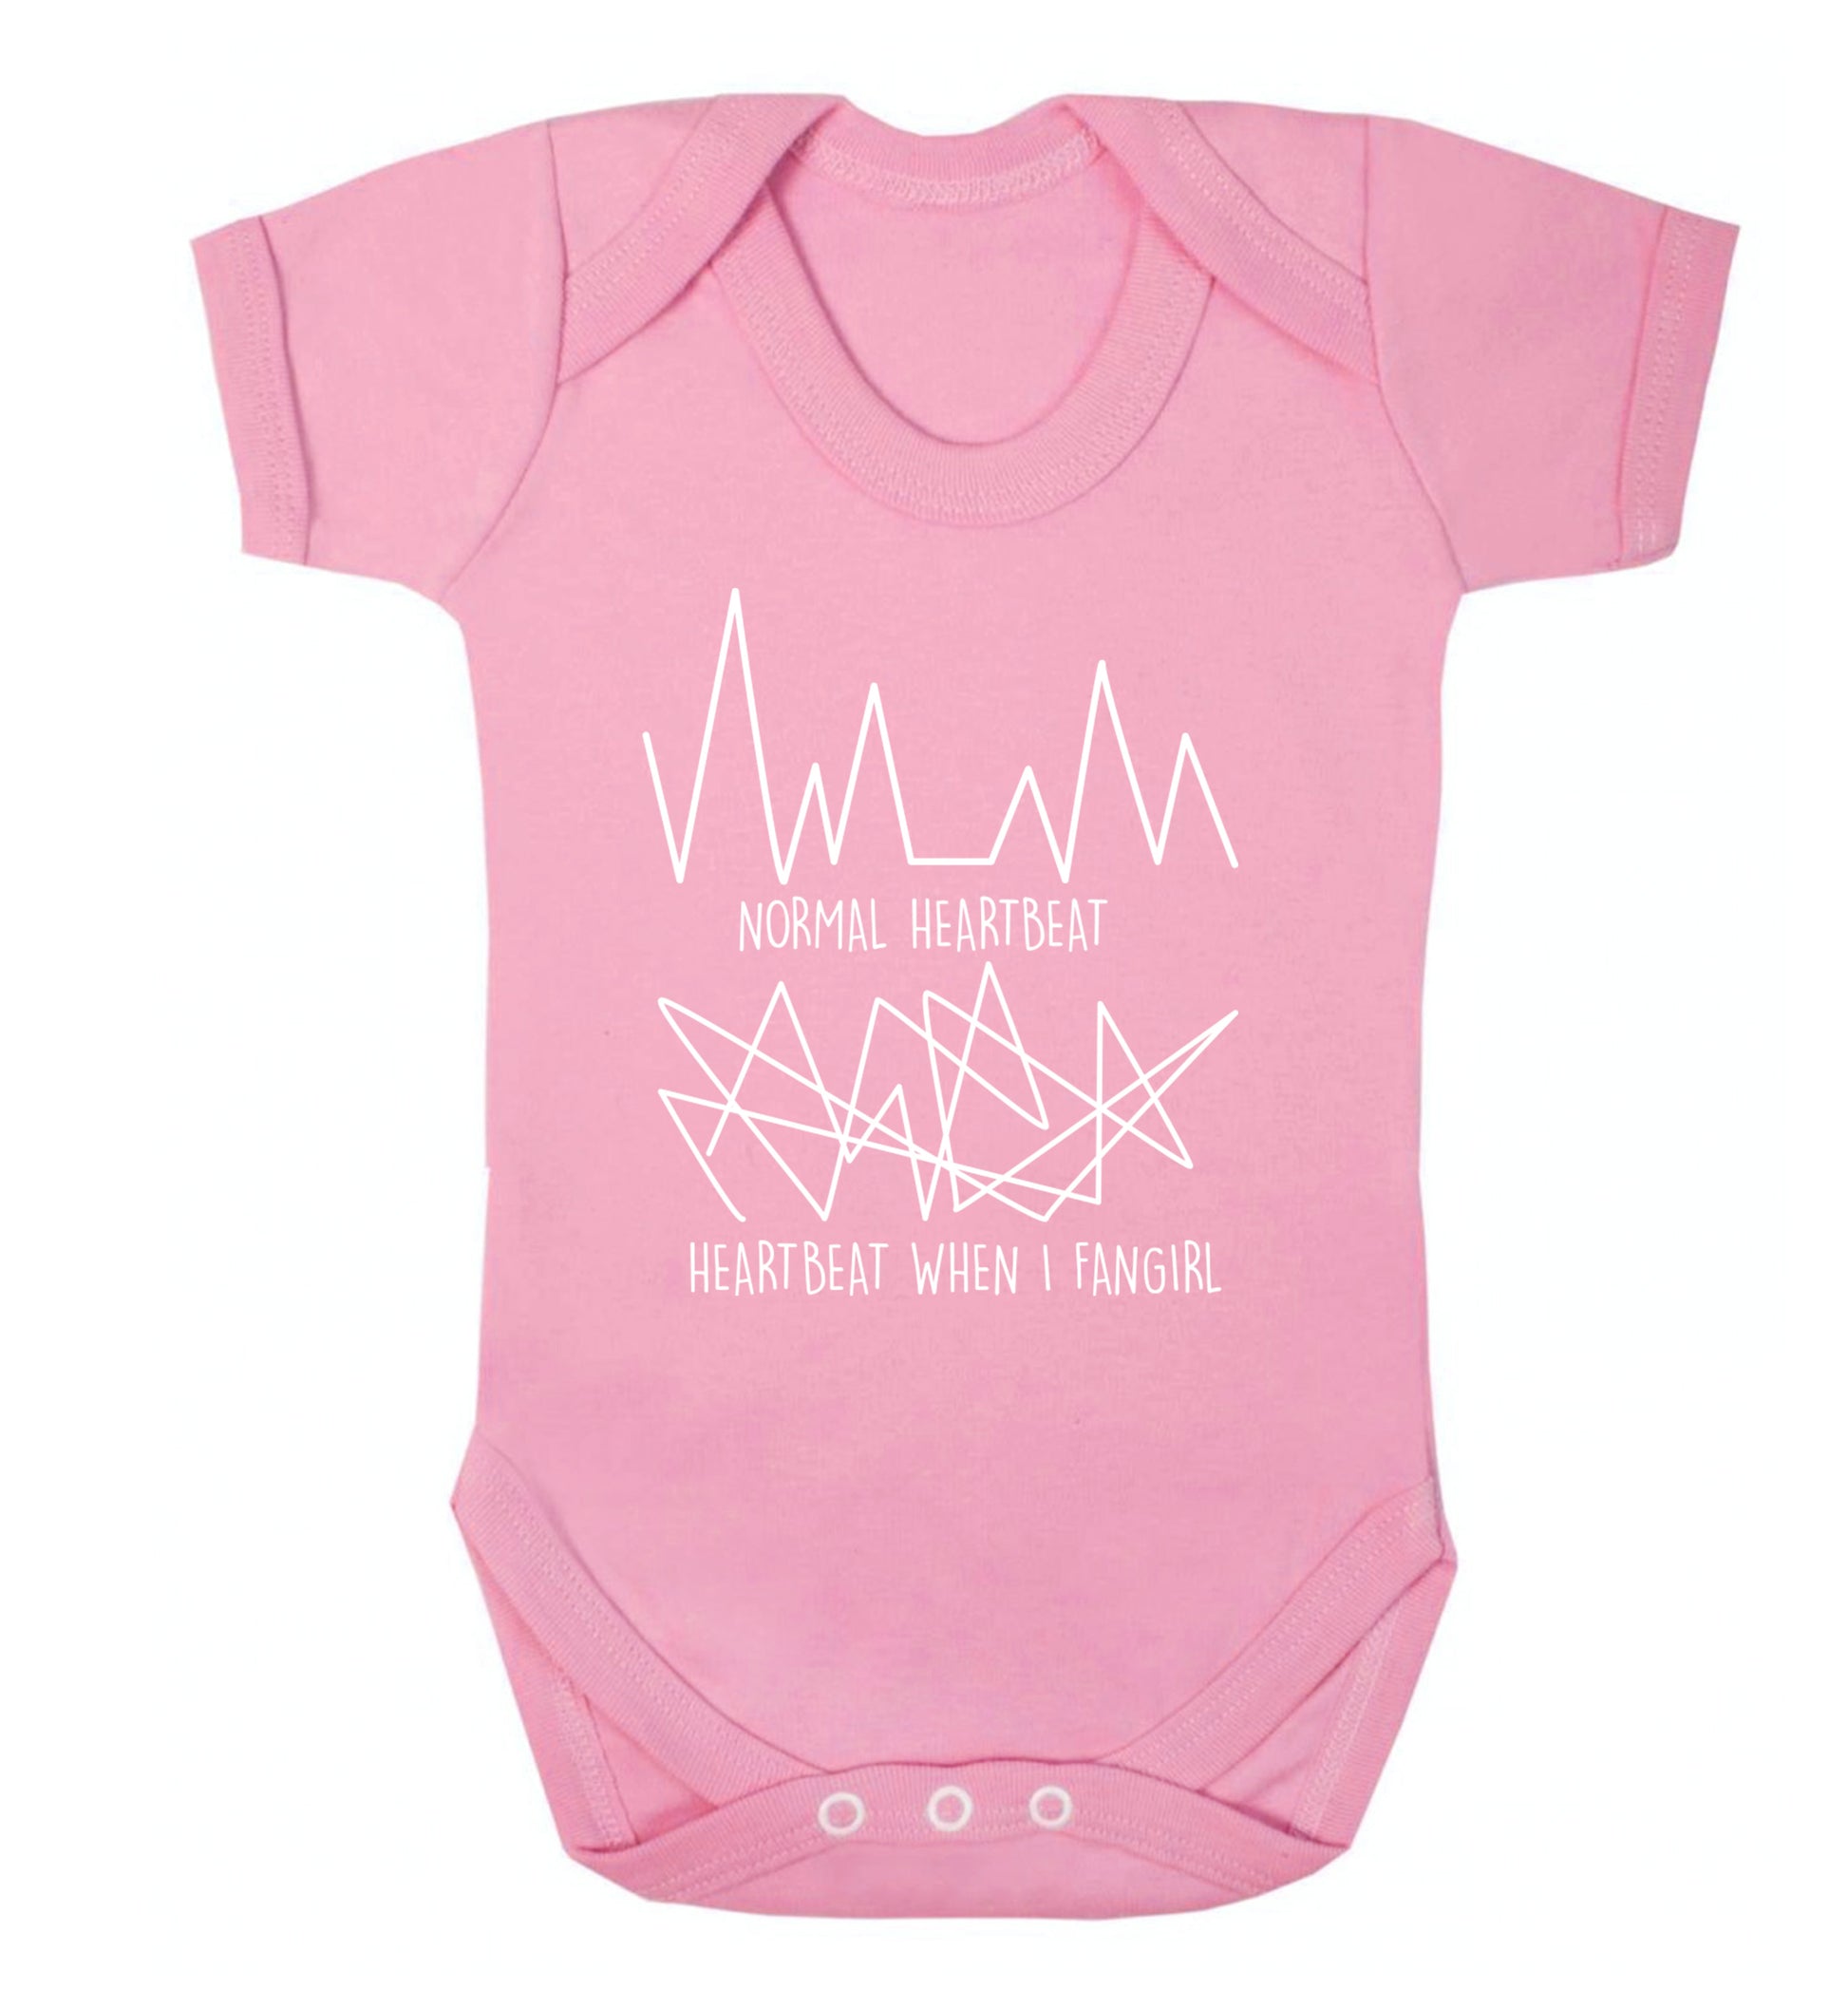 Normal heartbeat heartbeat when I fangirl Baby Vest pale pink 18-24 months